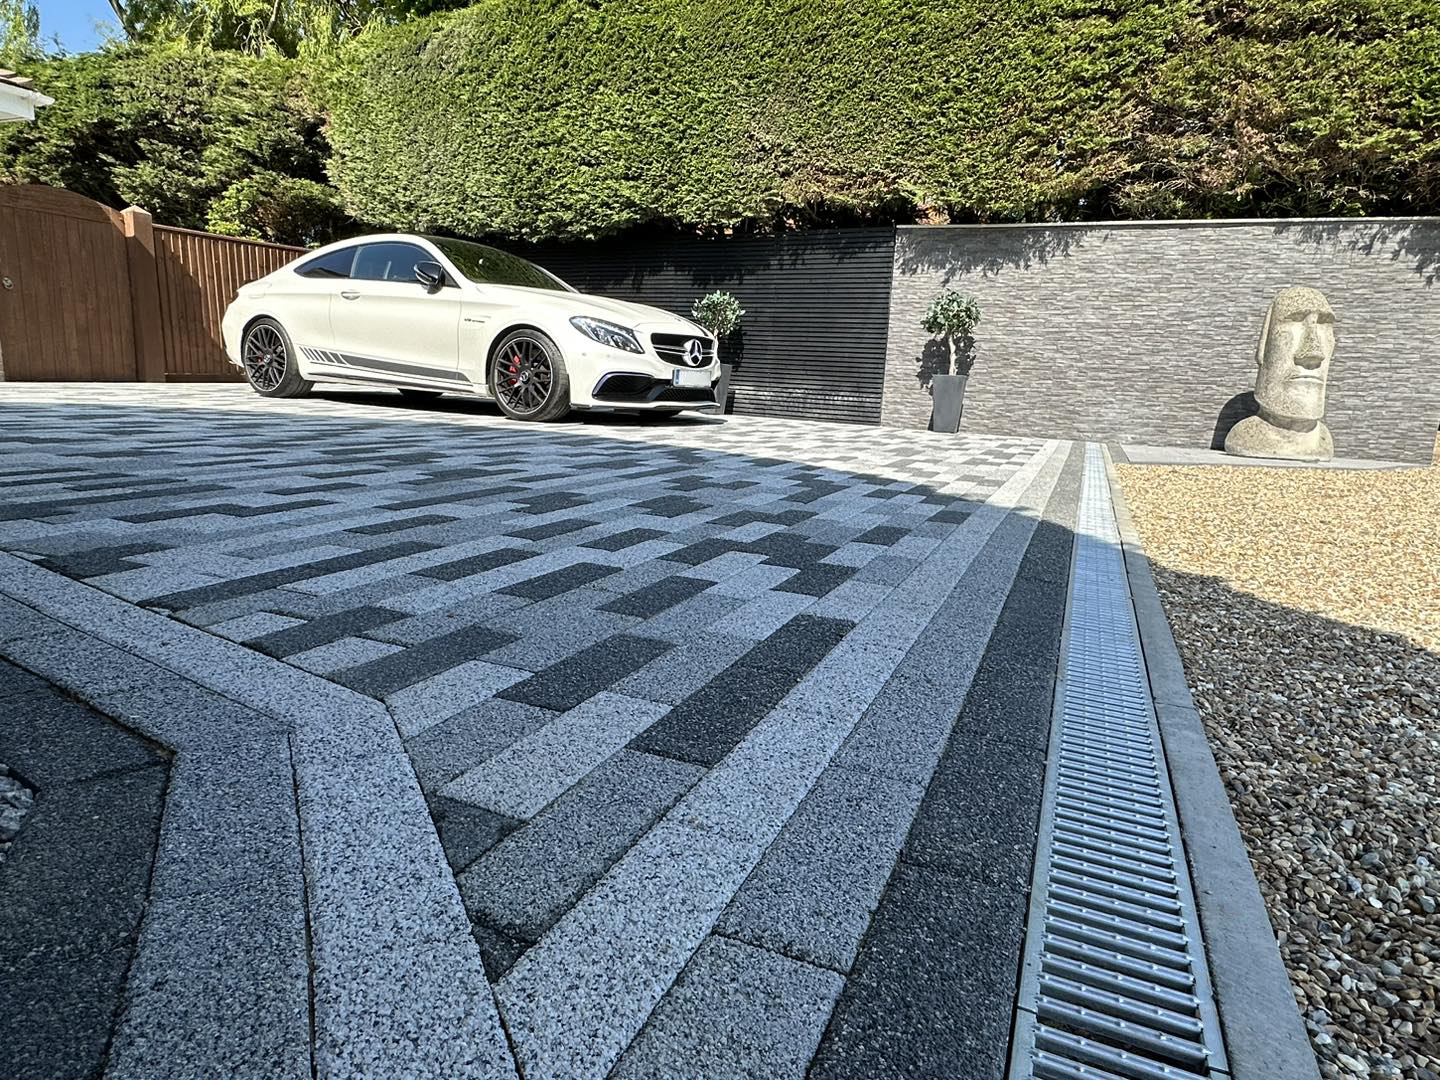 paving for driveways | driveway ideas invicta invicta block paving 300x100 paving grey block paving driveway design ideas for driveways granite paving granite pavers